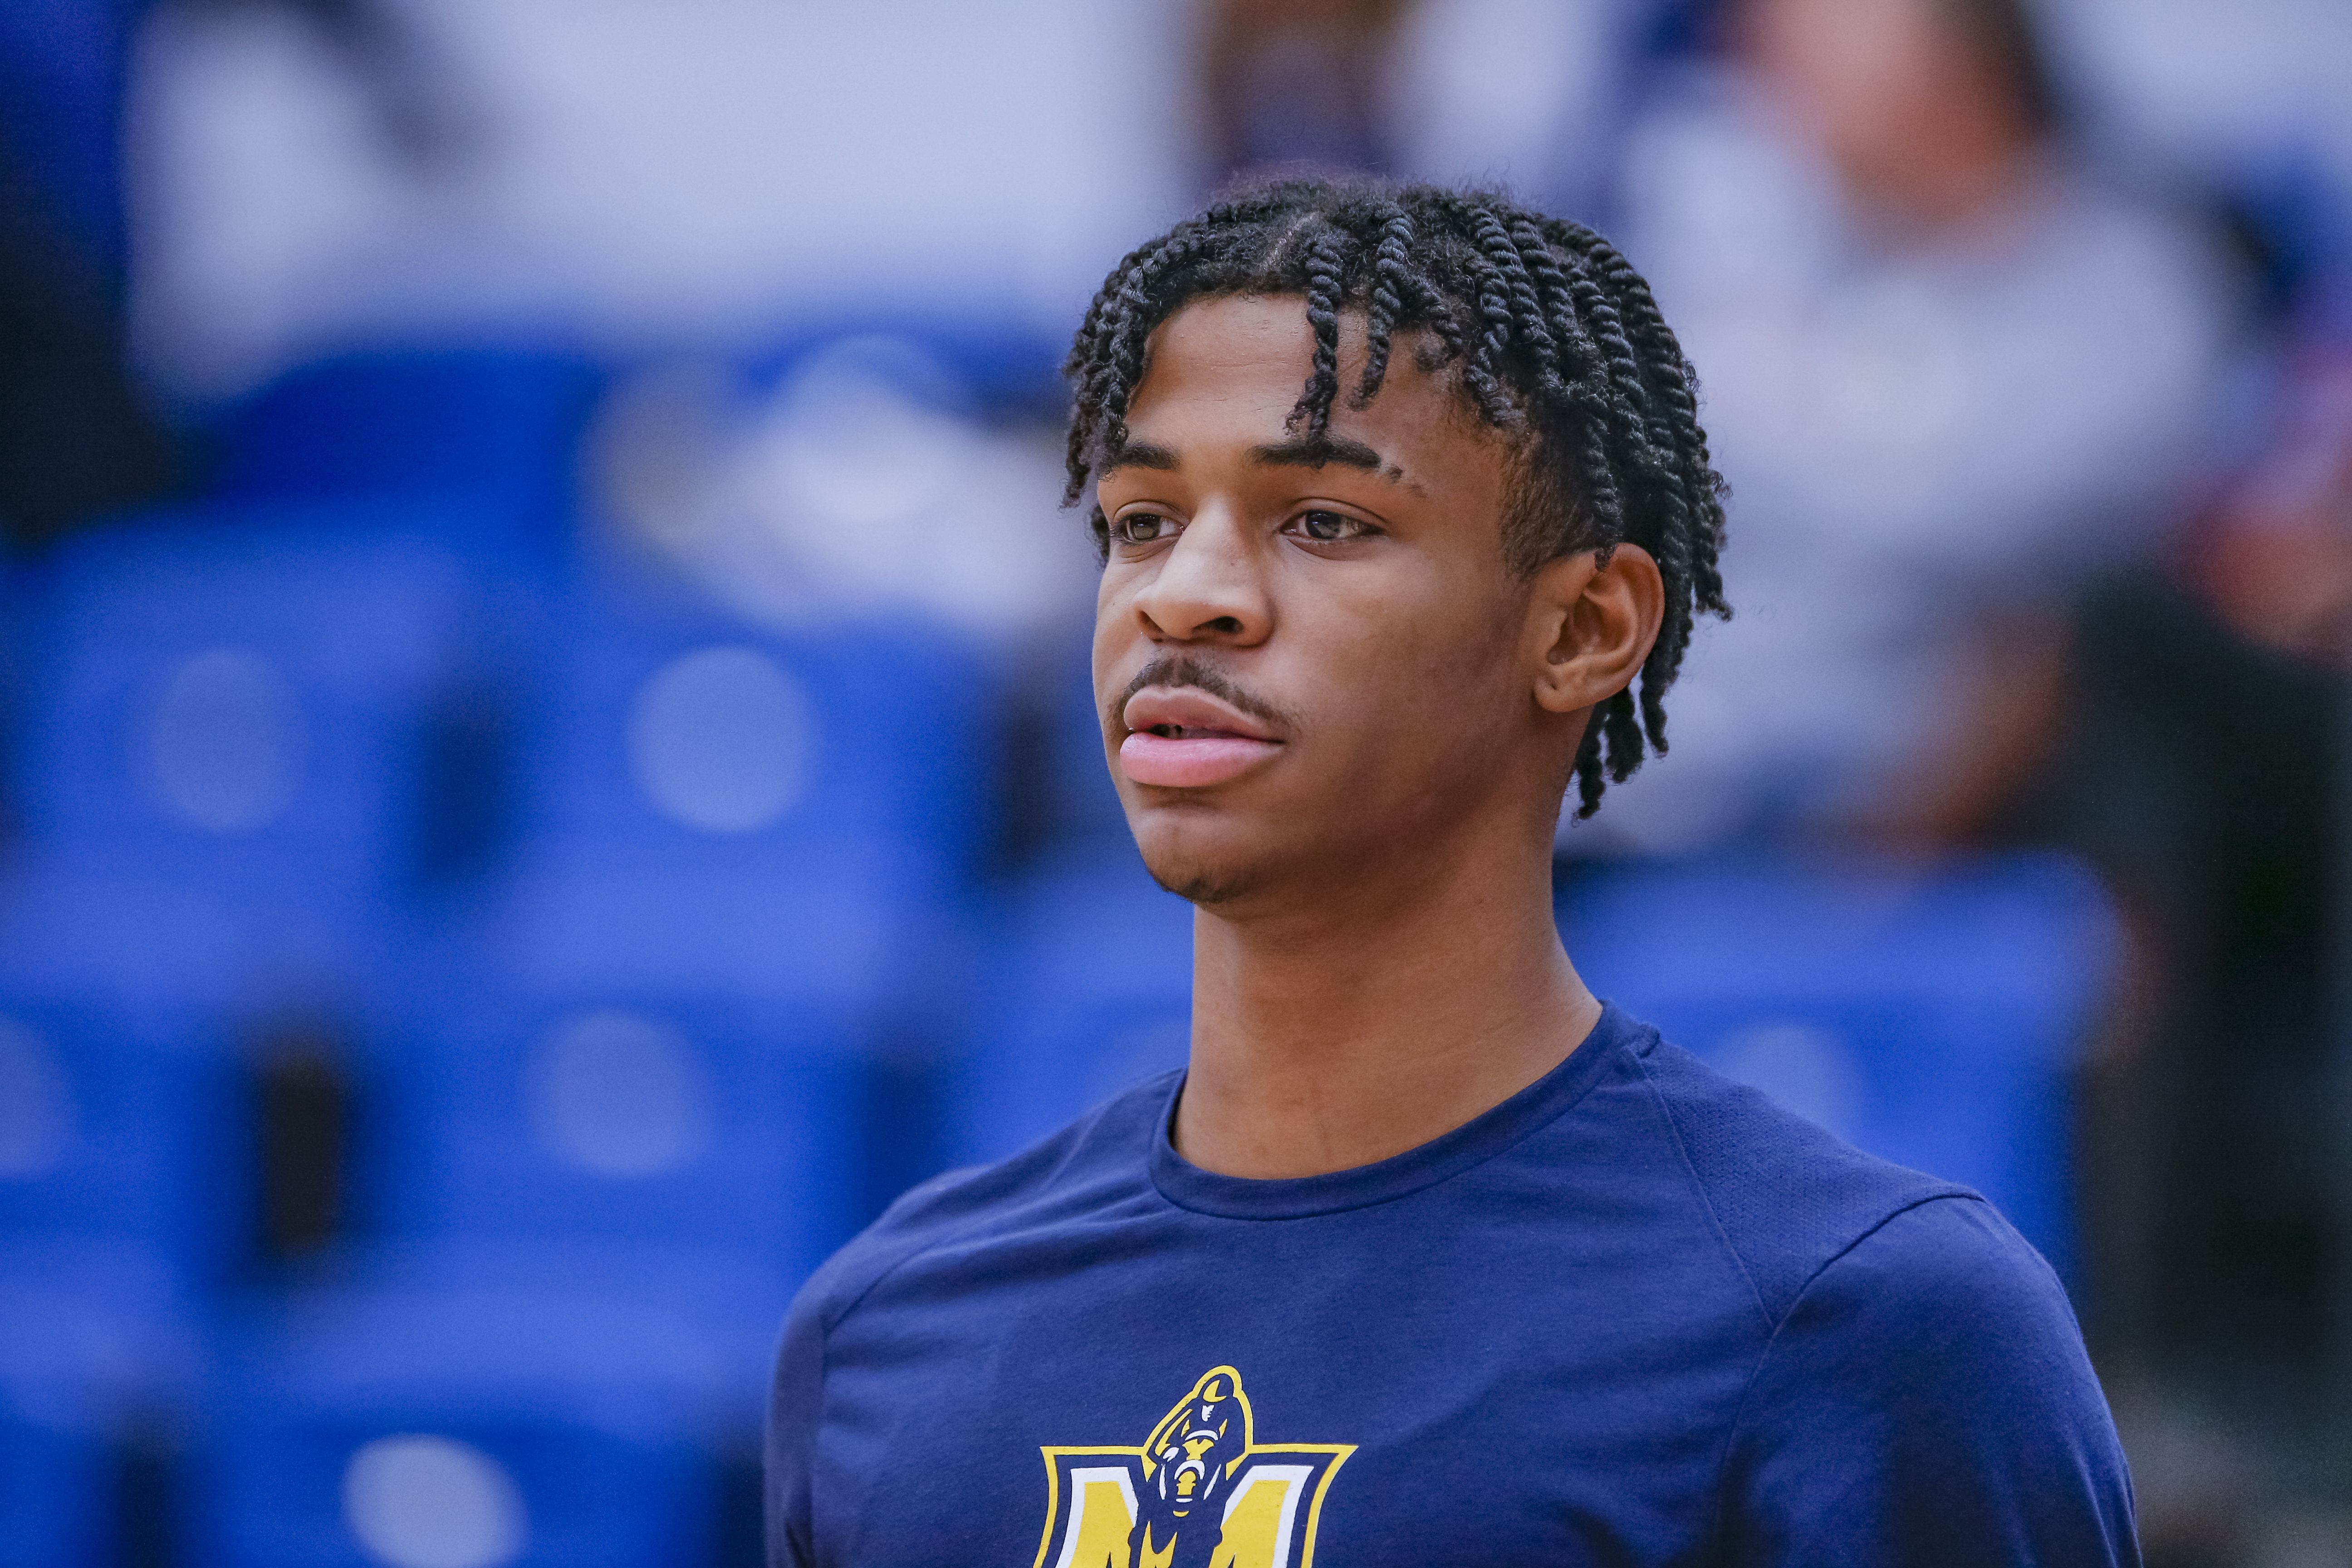 Ja Morant's path from unknown to top NBA draft prospect.